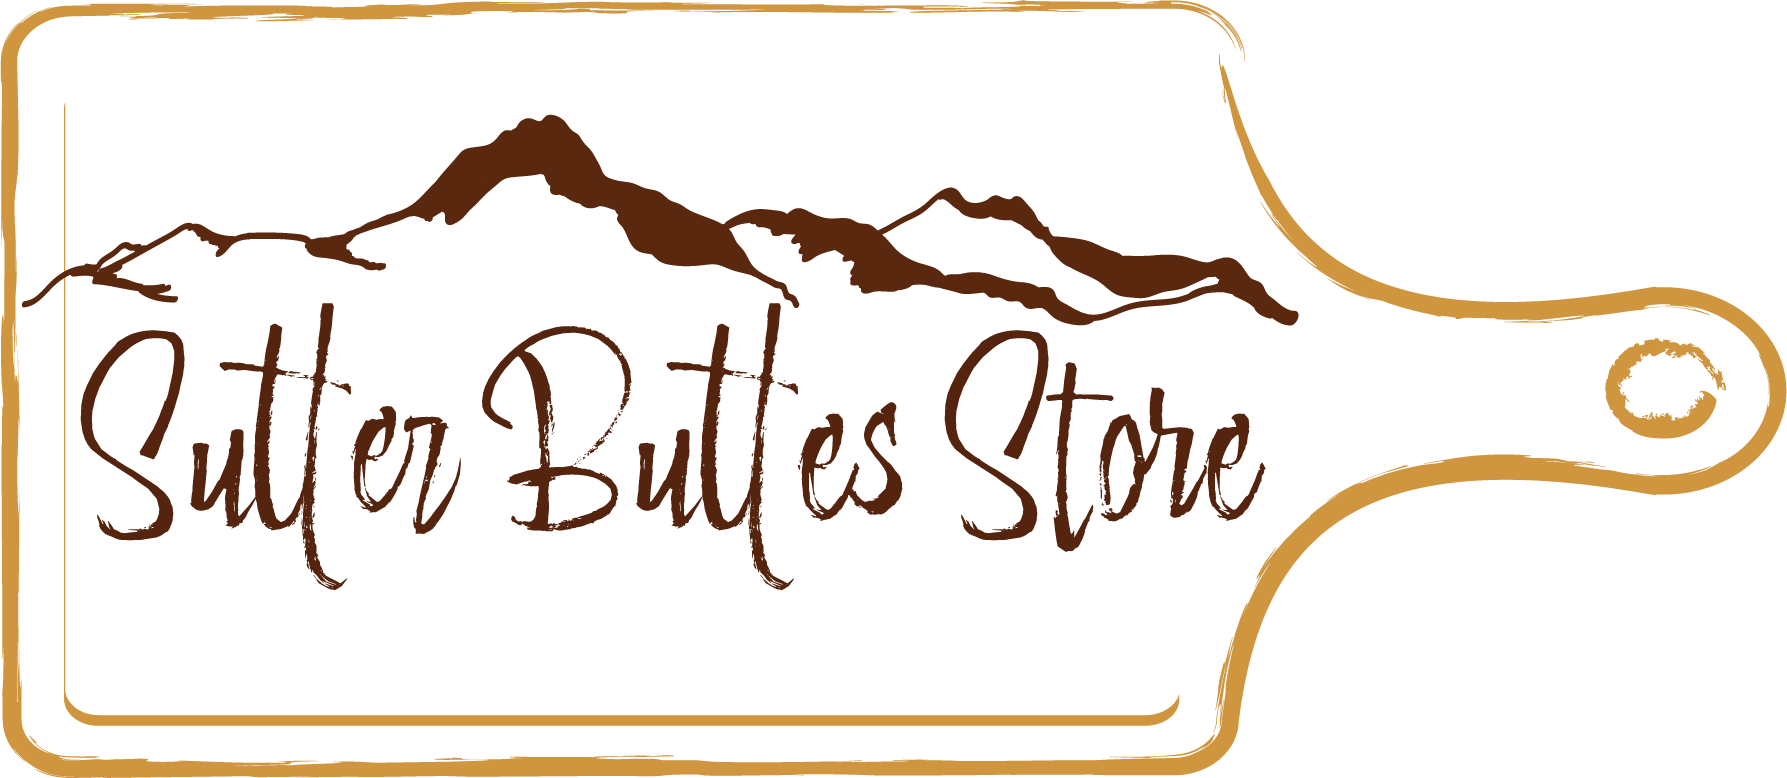 The Sutter Buttes Store